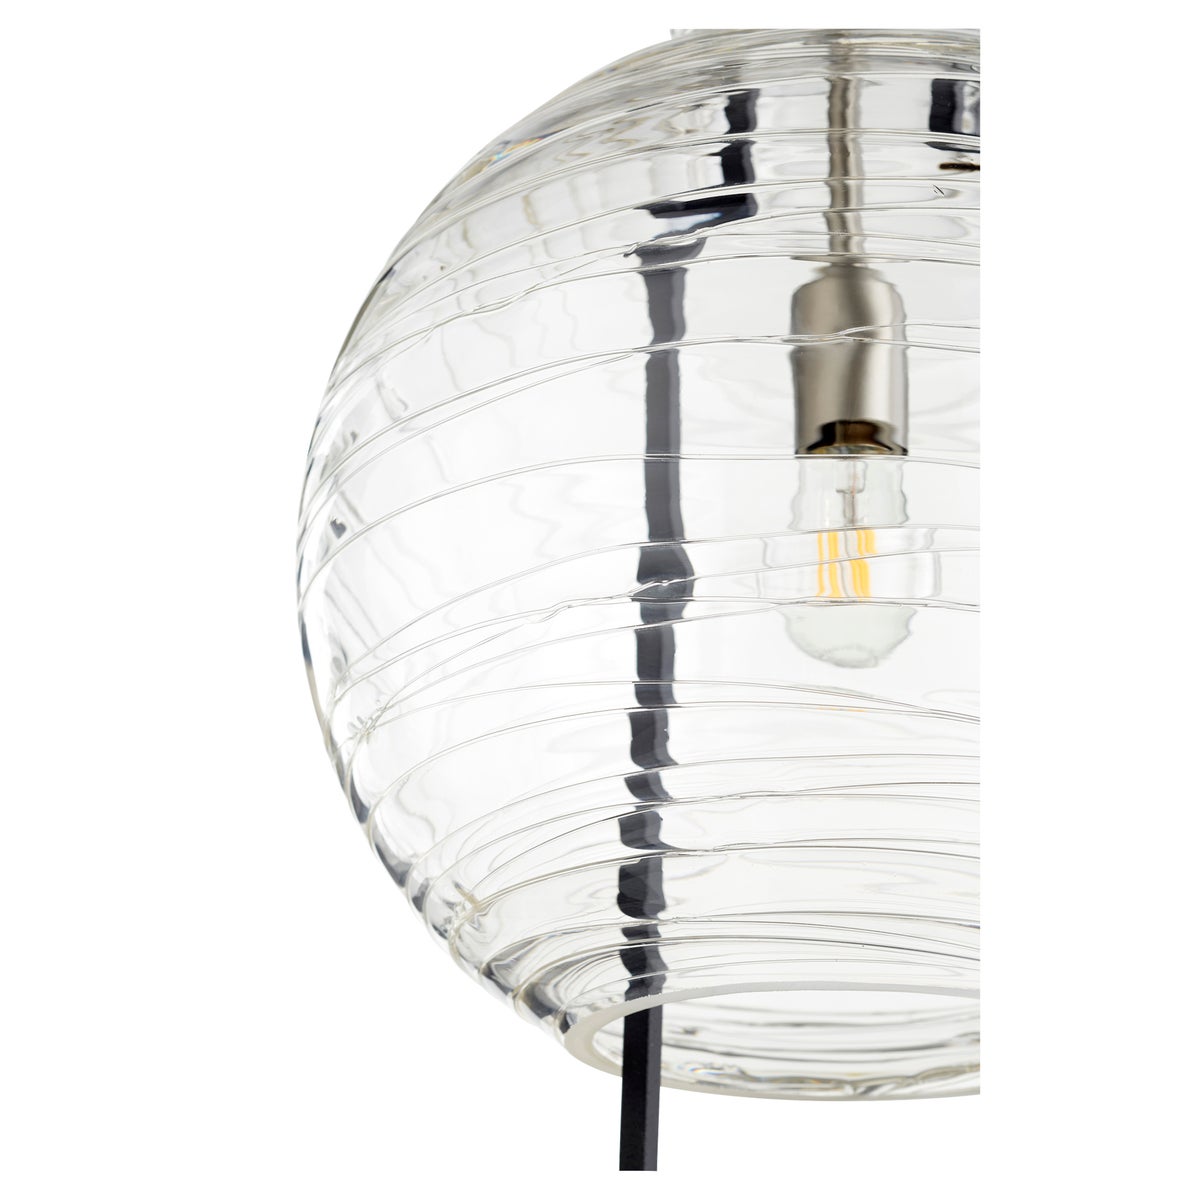 Globe Pendant Light with clear glass shade and noir/satin nickel finishes, hanging from a dual chain and stem system. Adds contemporary-chic style to any setting. Perfect for kitchen, bedroom, or bathroom. Wattage: 100W, Voltage: 120V. Bulbs not included. UL Listed for damp locations. Metal and Clear Textured Glass materials. Dimensions: 14"W x 27.75"H. Warranty: 2 Years.